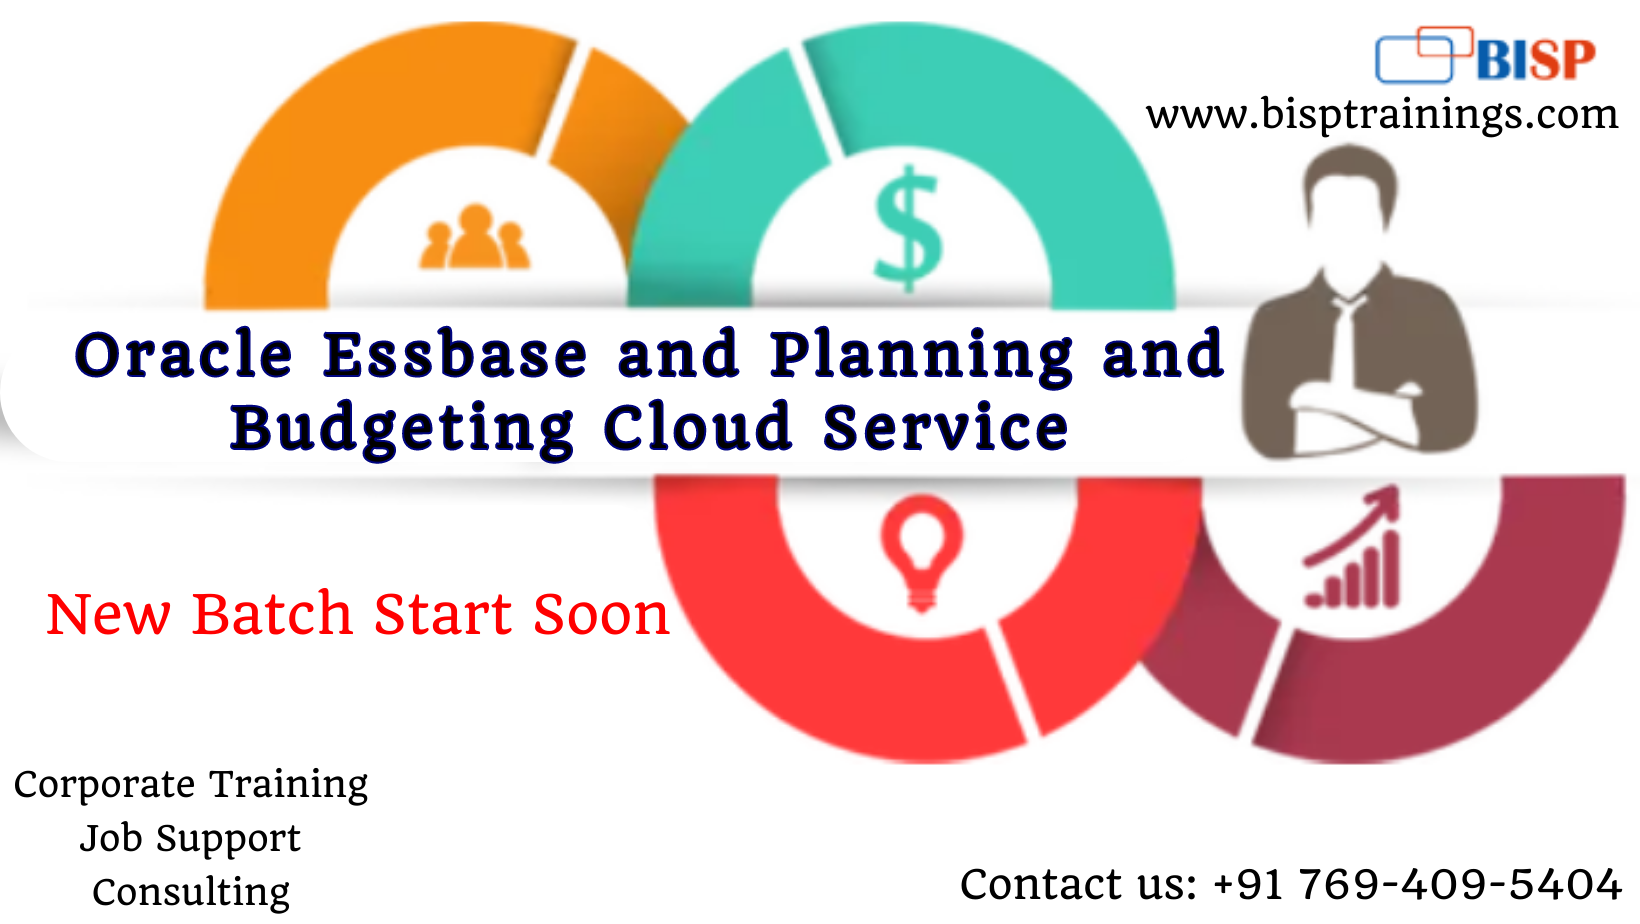 Oracle Essbase and Planning and Budgeting Cloud Service Training - Miami Professional Services